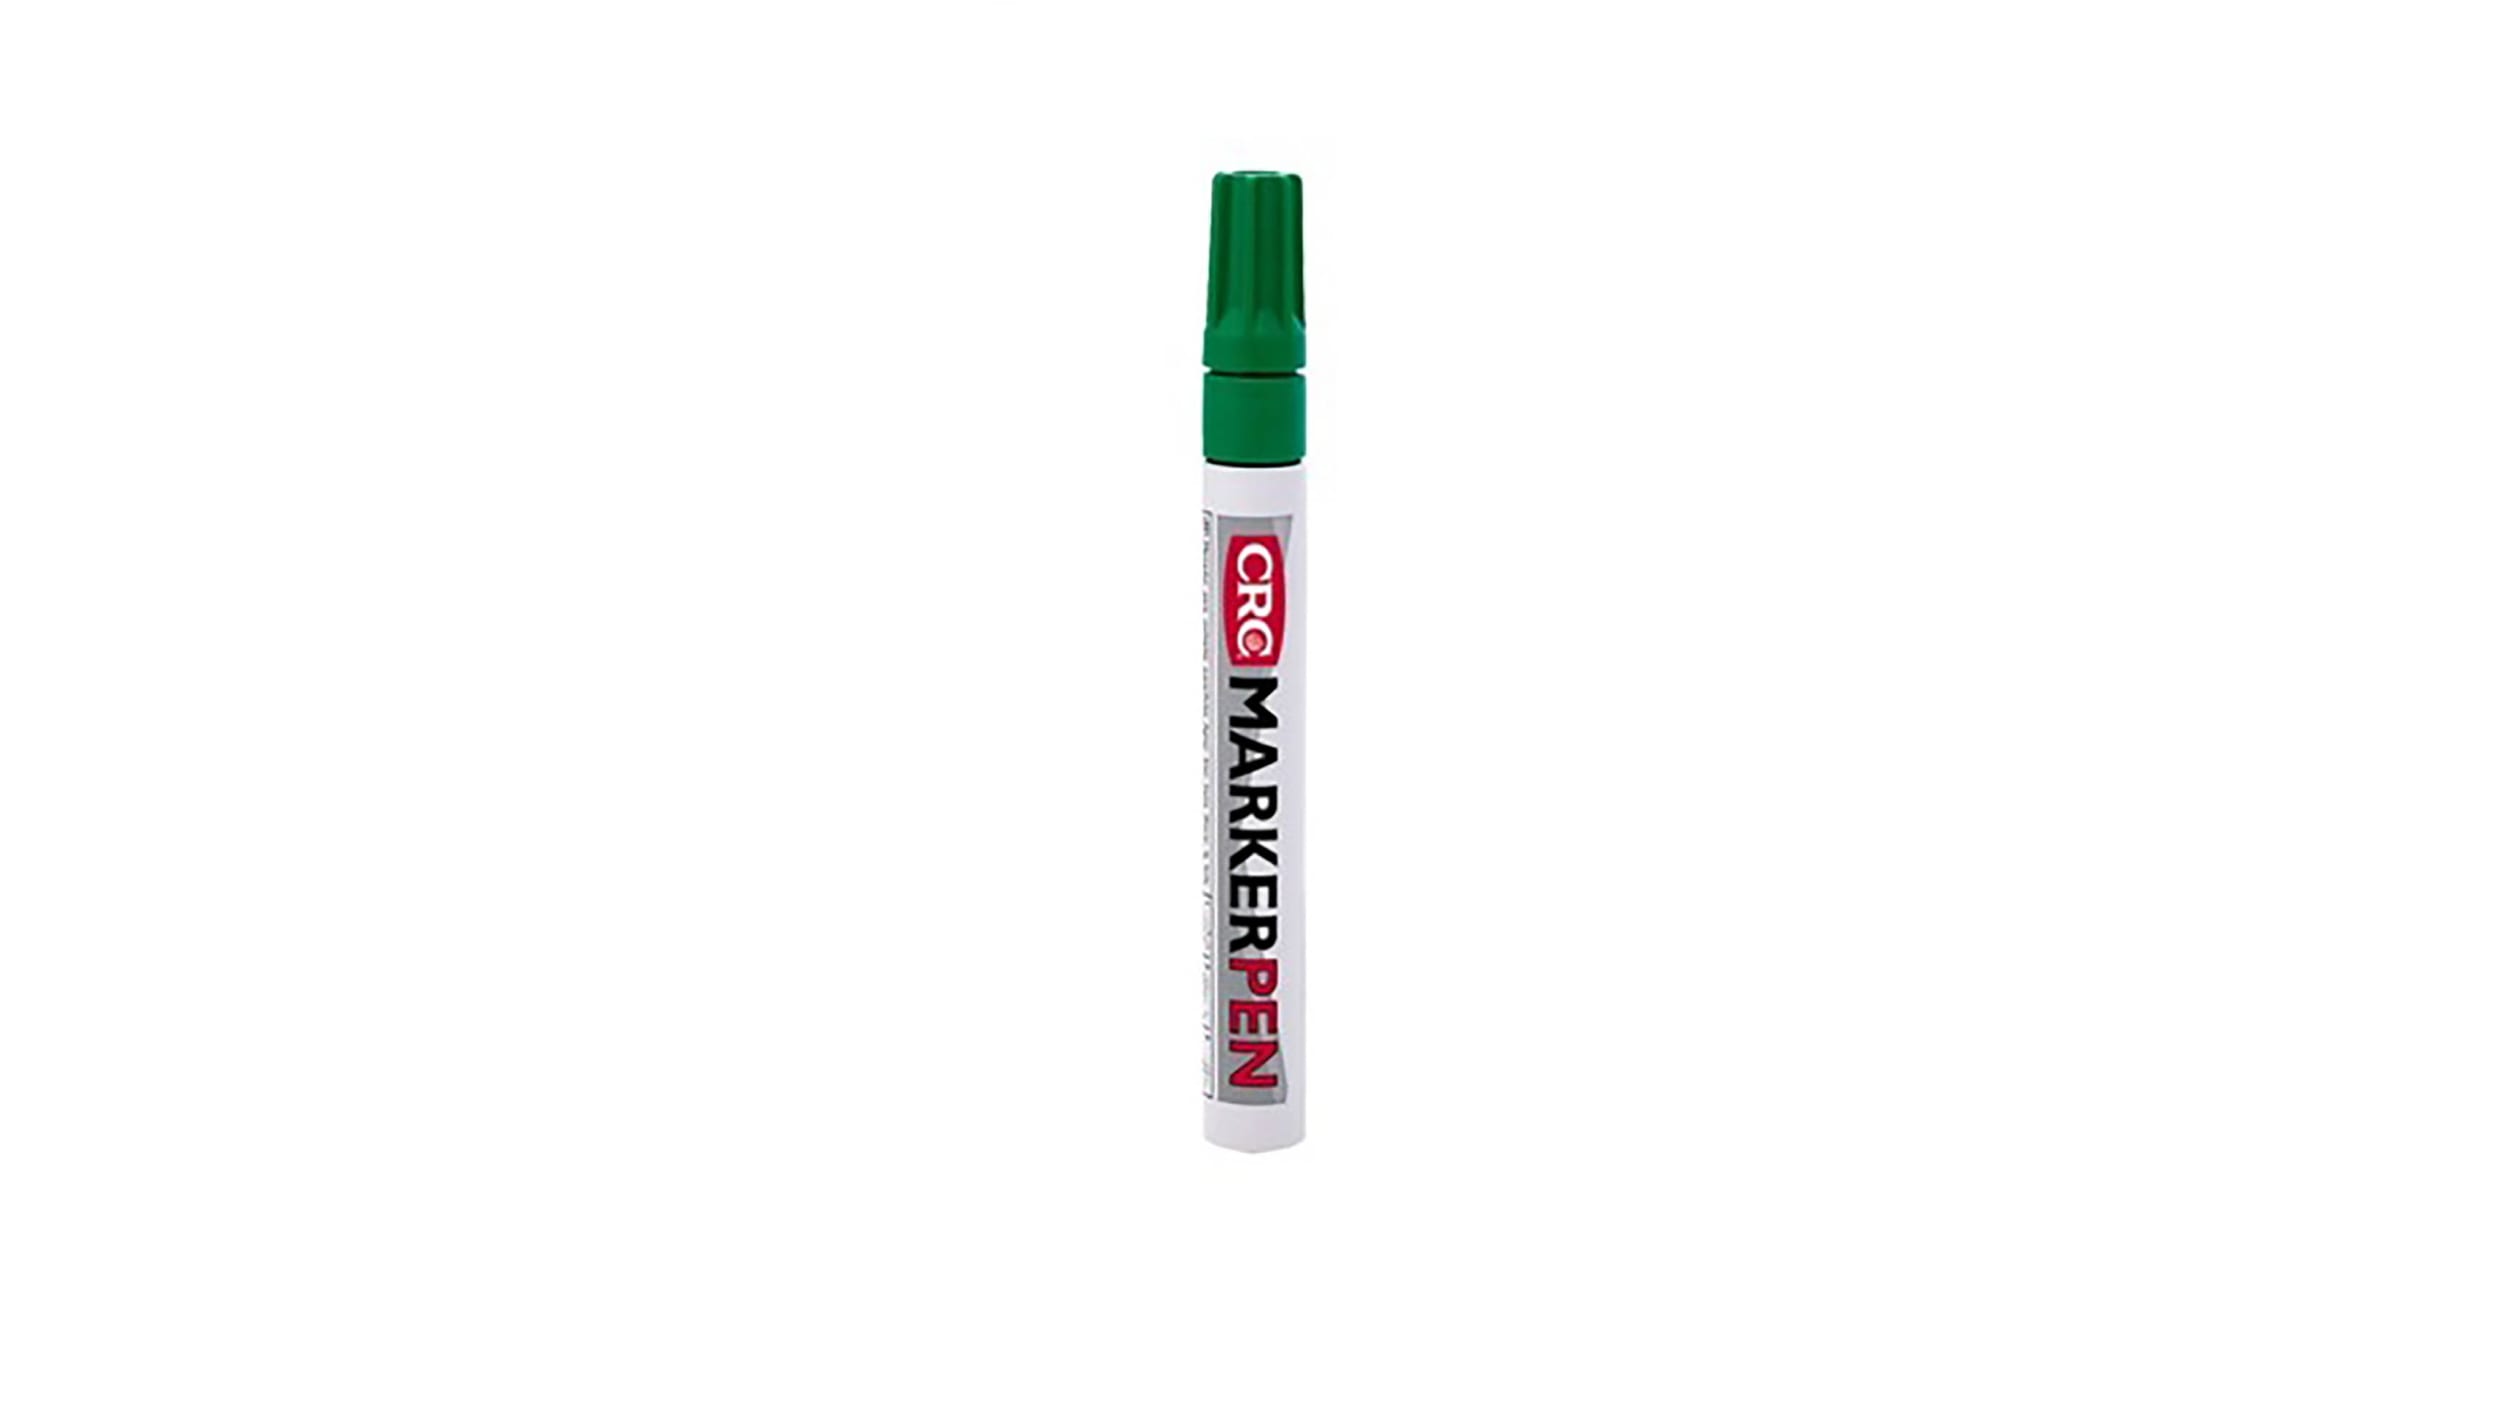 CRC Paint Marker Pen Red - 20388 - CRC